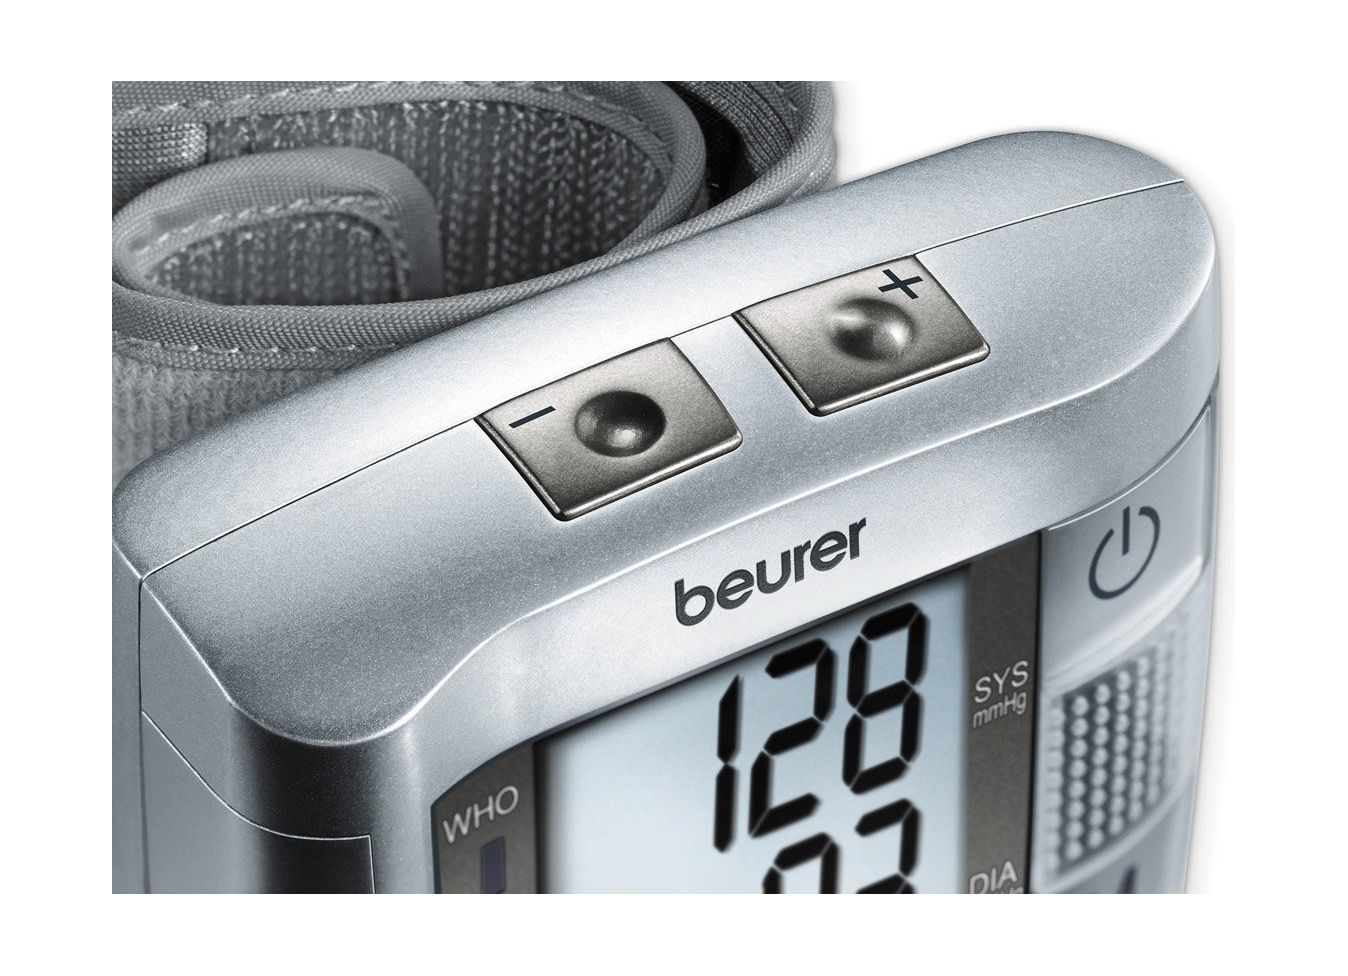 Buy Beurer bc 19 blood pressure monitor with integrated voice function in Saudi Arabia